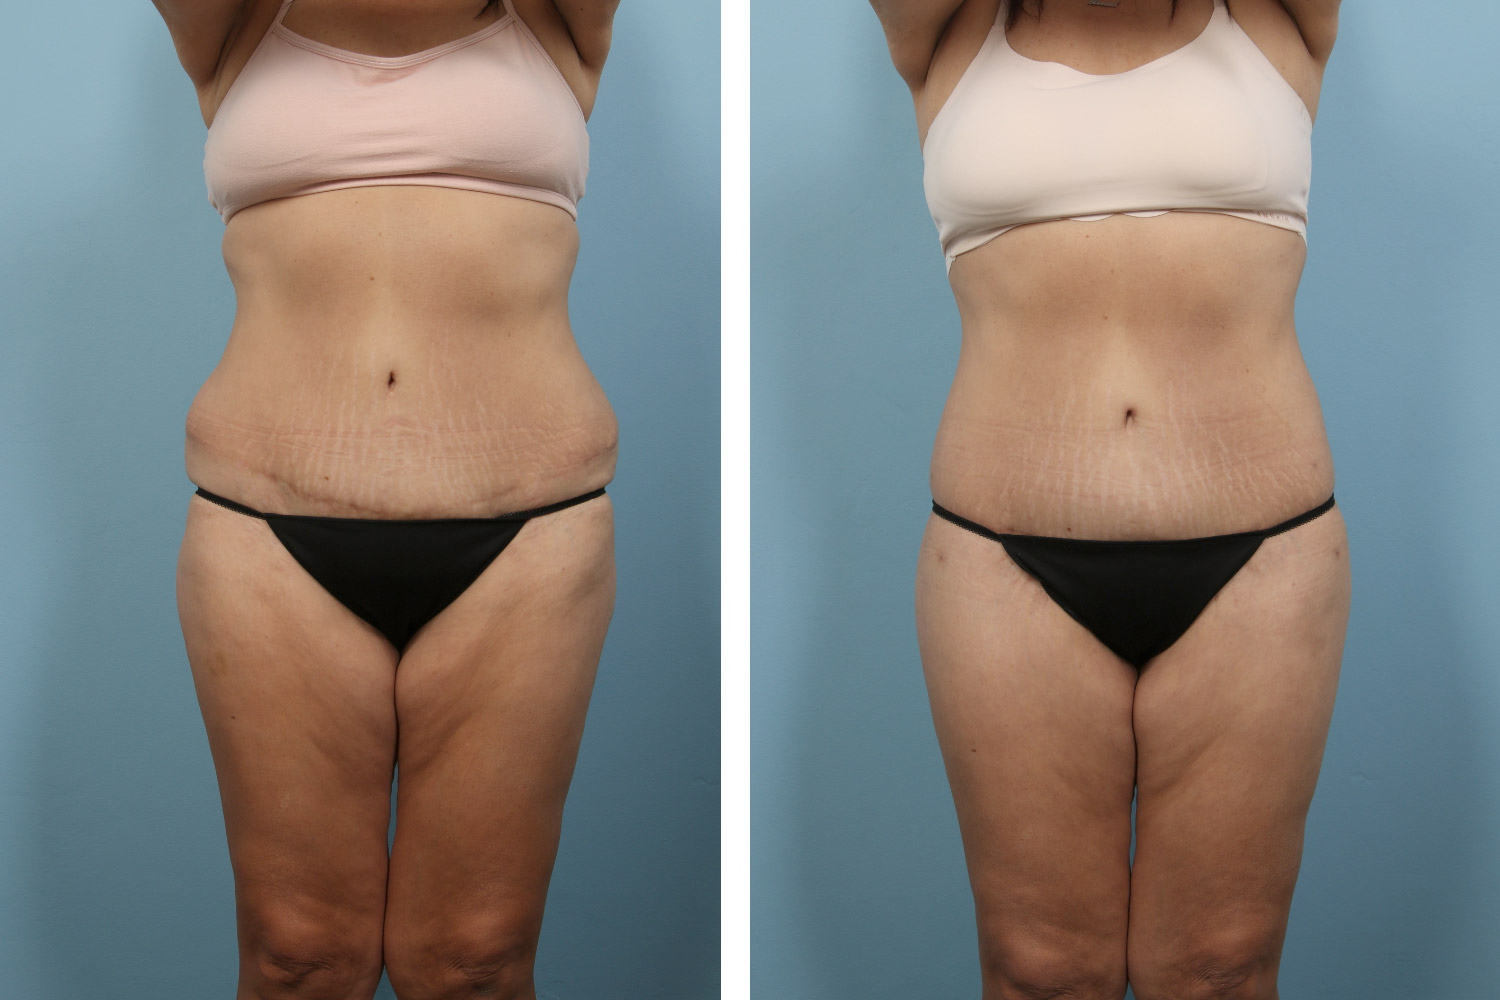 Tummy tuck with buttock lift and liposuction on a 55-year-old woman